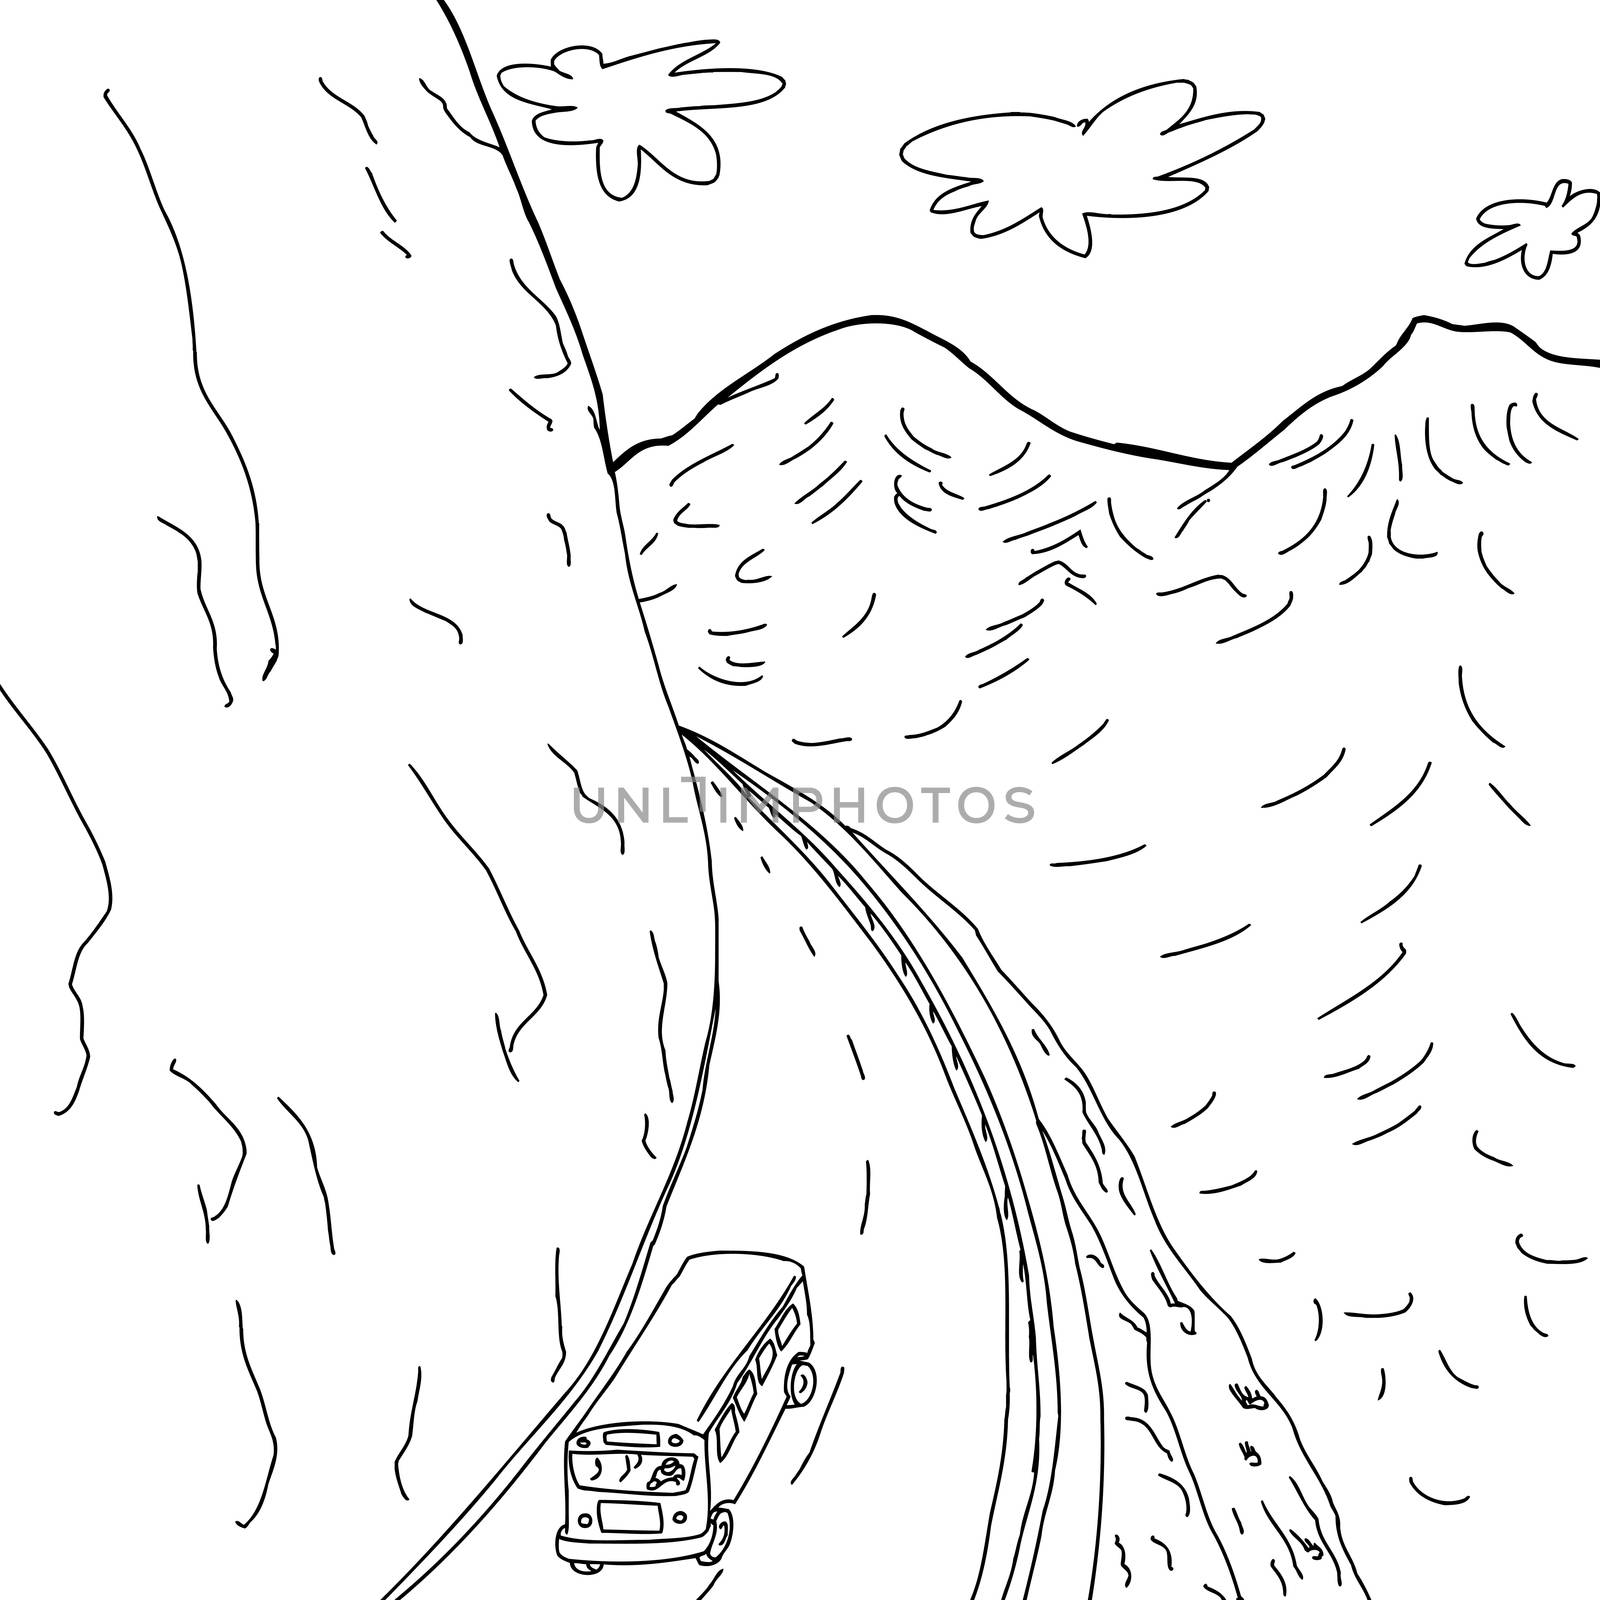 Outline cartoon drawing of school bus on mountain highway